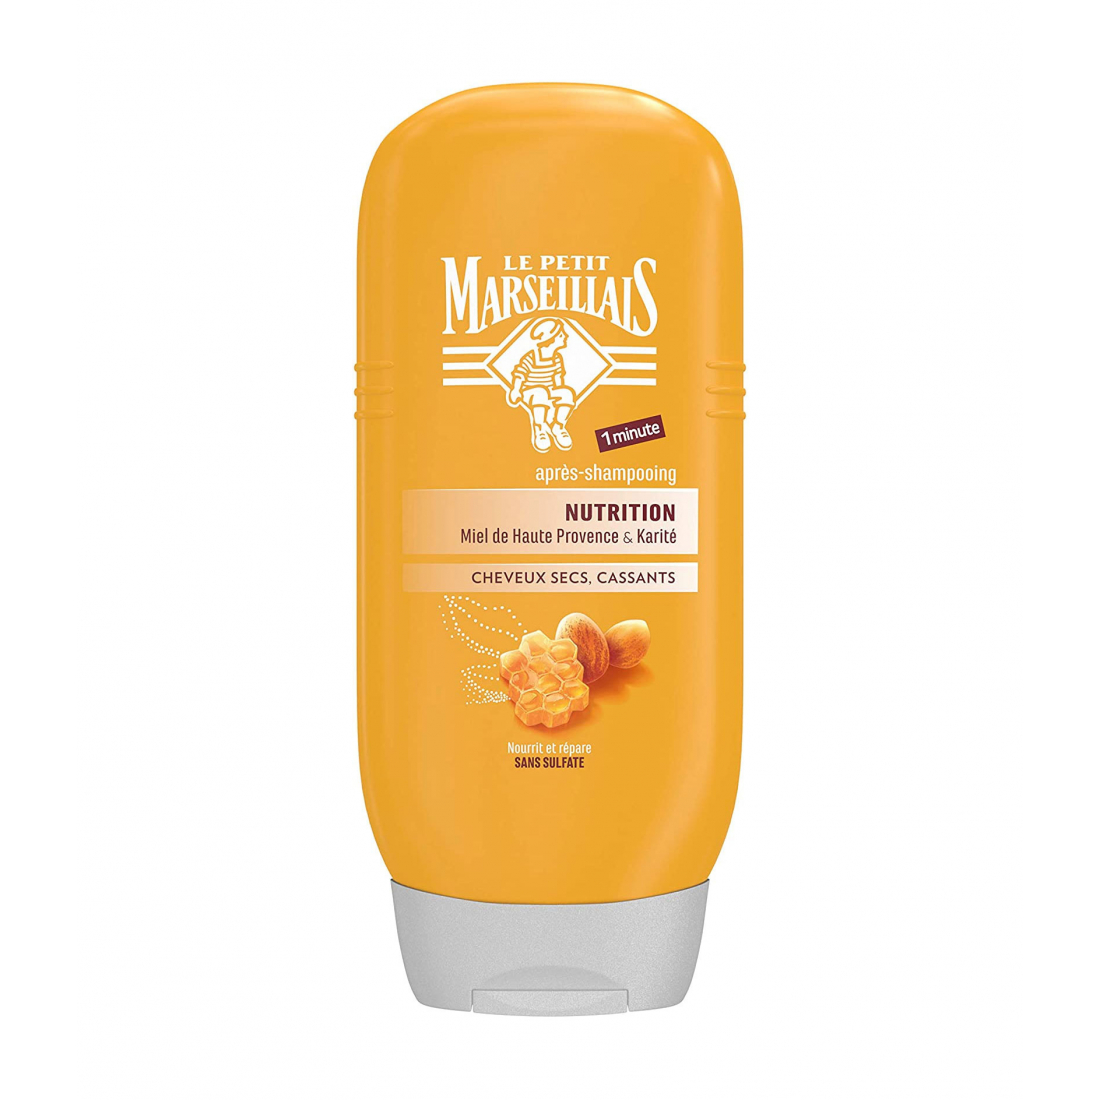 Après-shampoing 'Nutrition Honey of Haute Provence and Shea Butter' - 200 ml